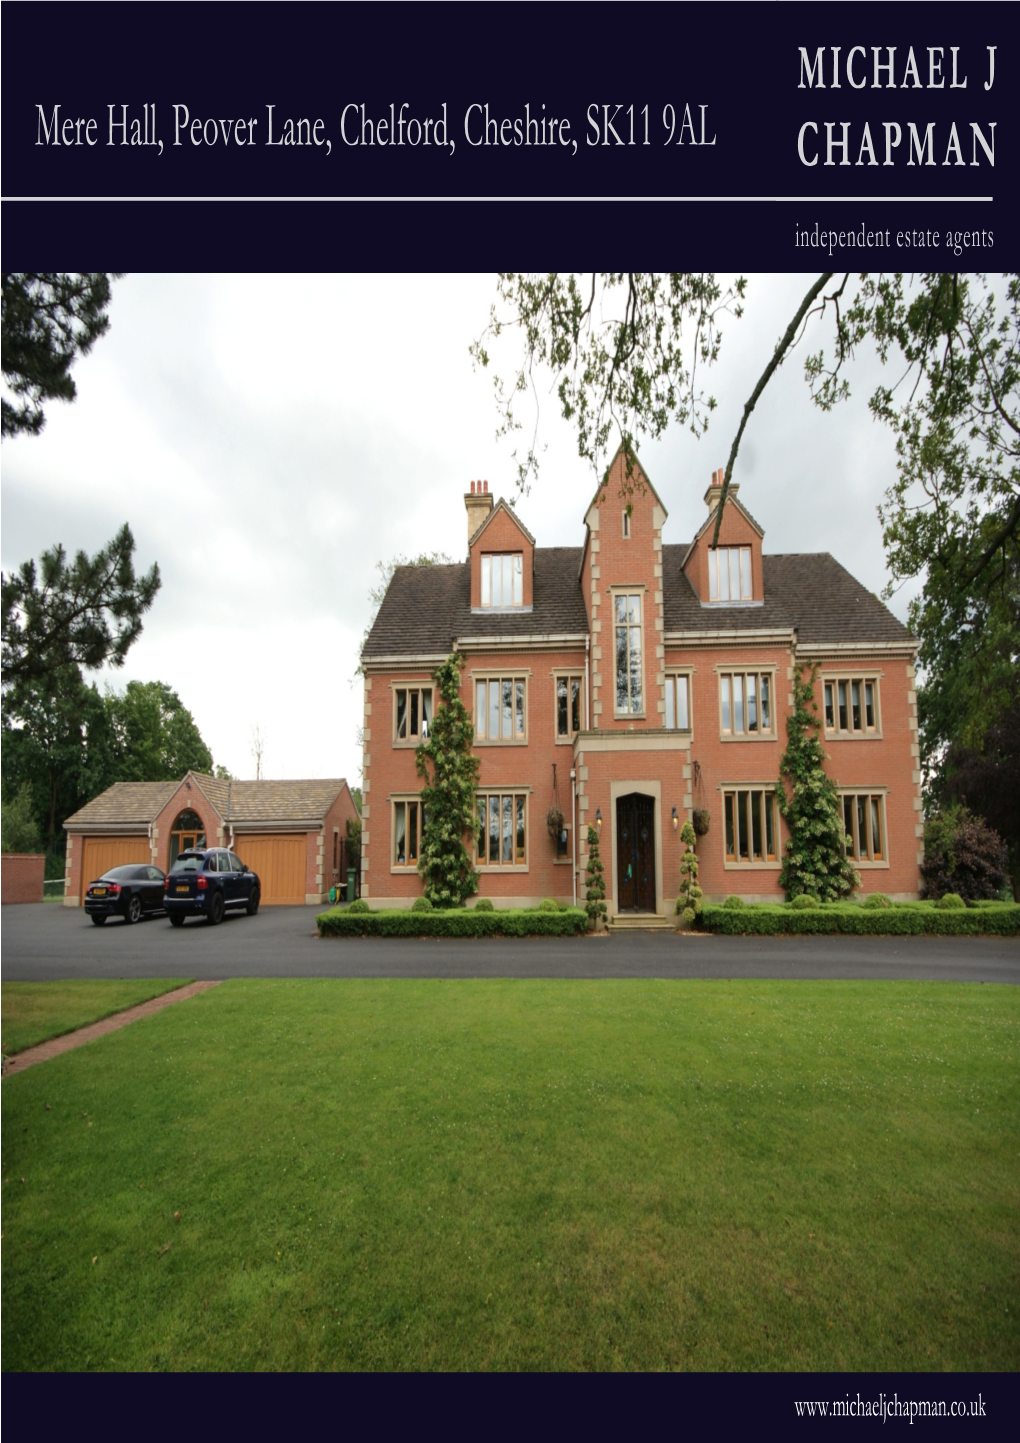 Mere Hall, Peover Lane, Chelford, Cheshire, SK11 9AL